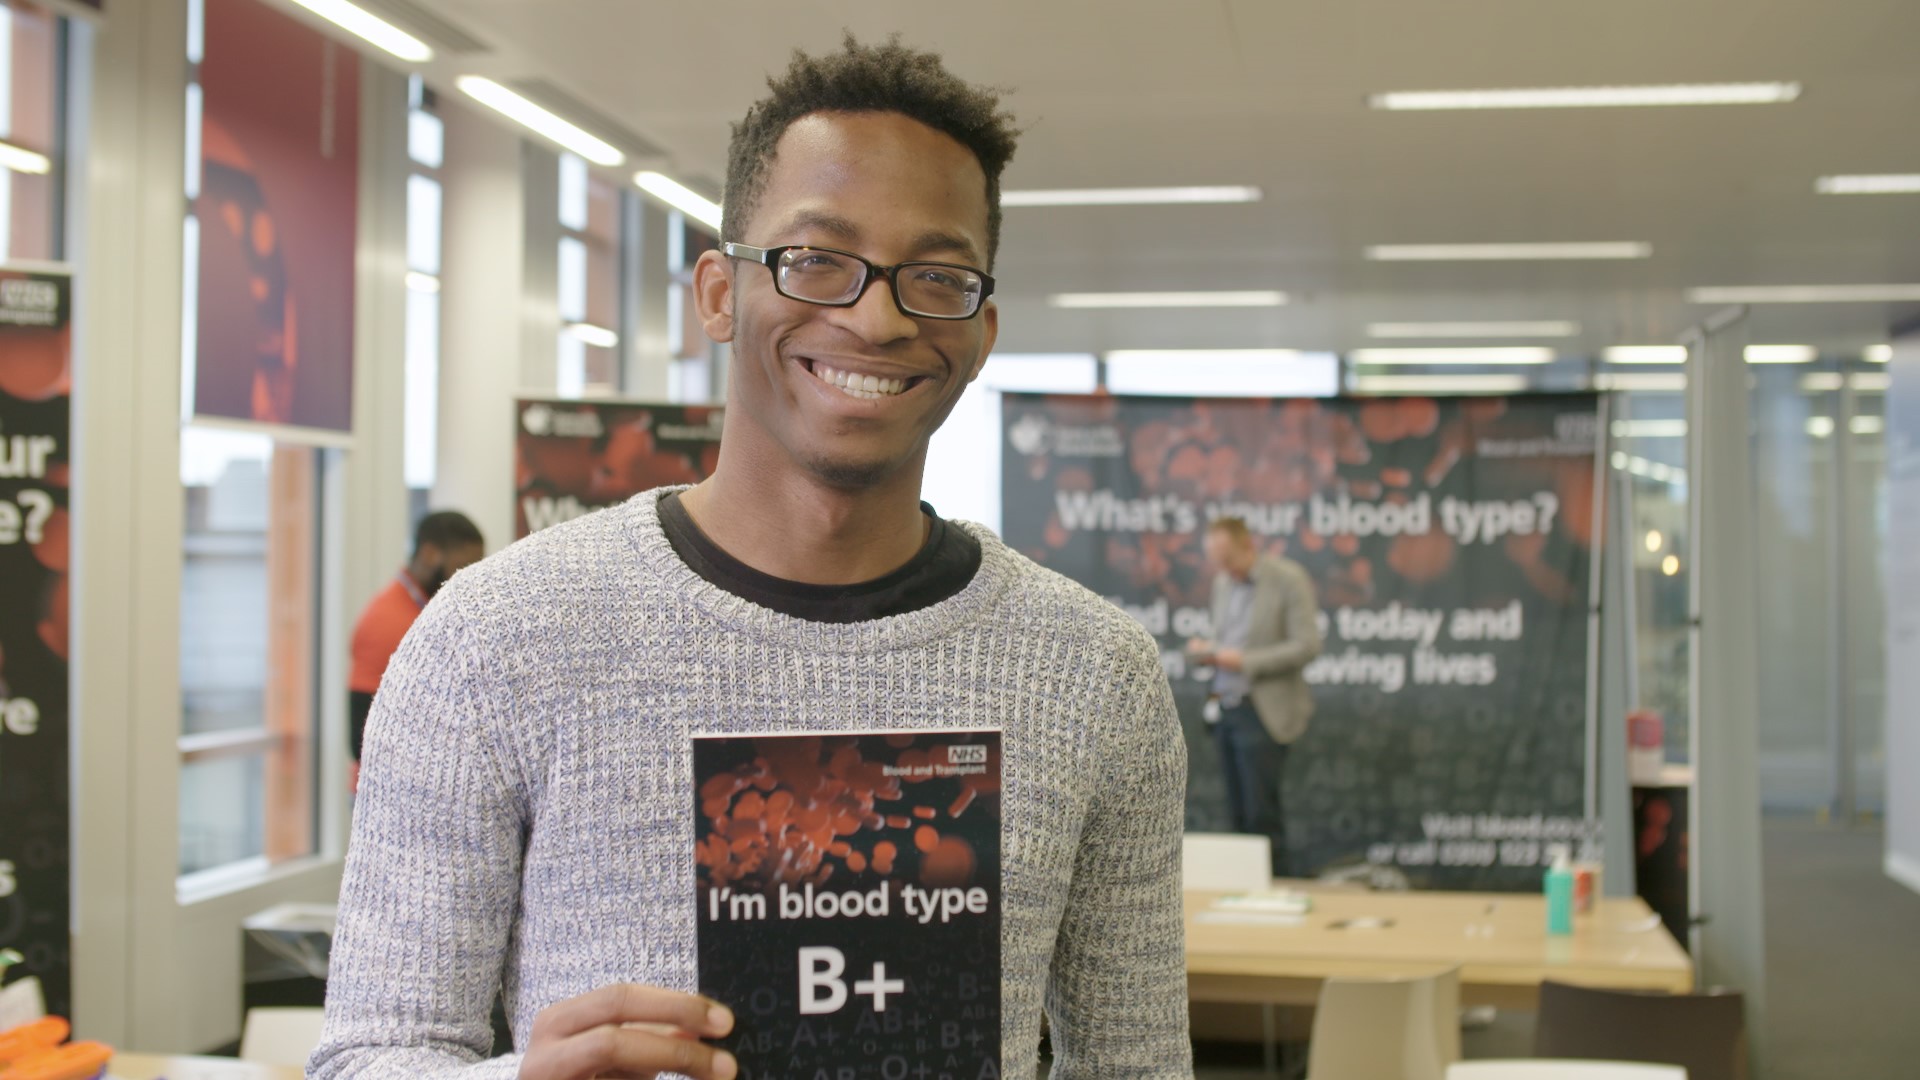 A young man holds a card that says, "I'm blood type B+"